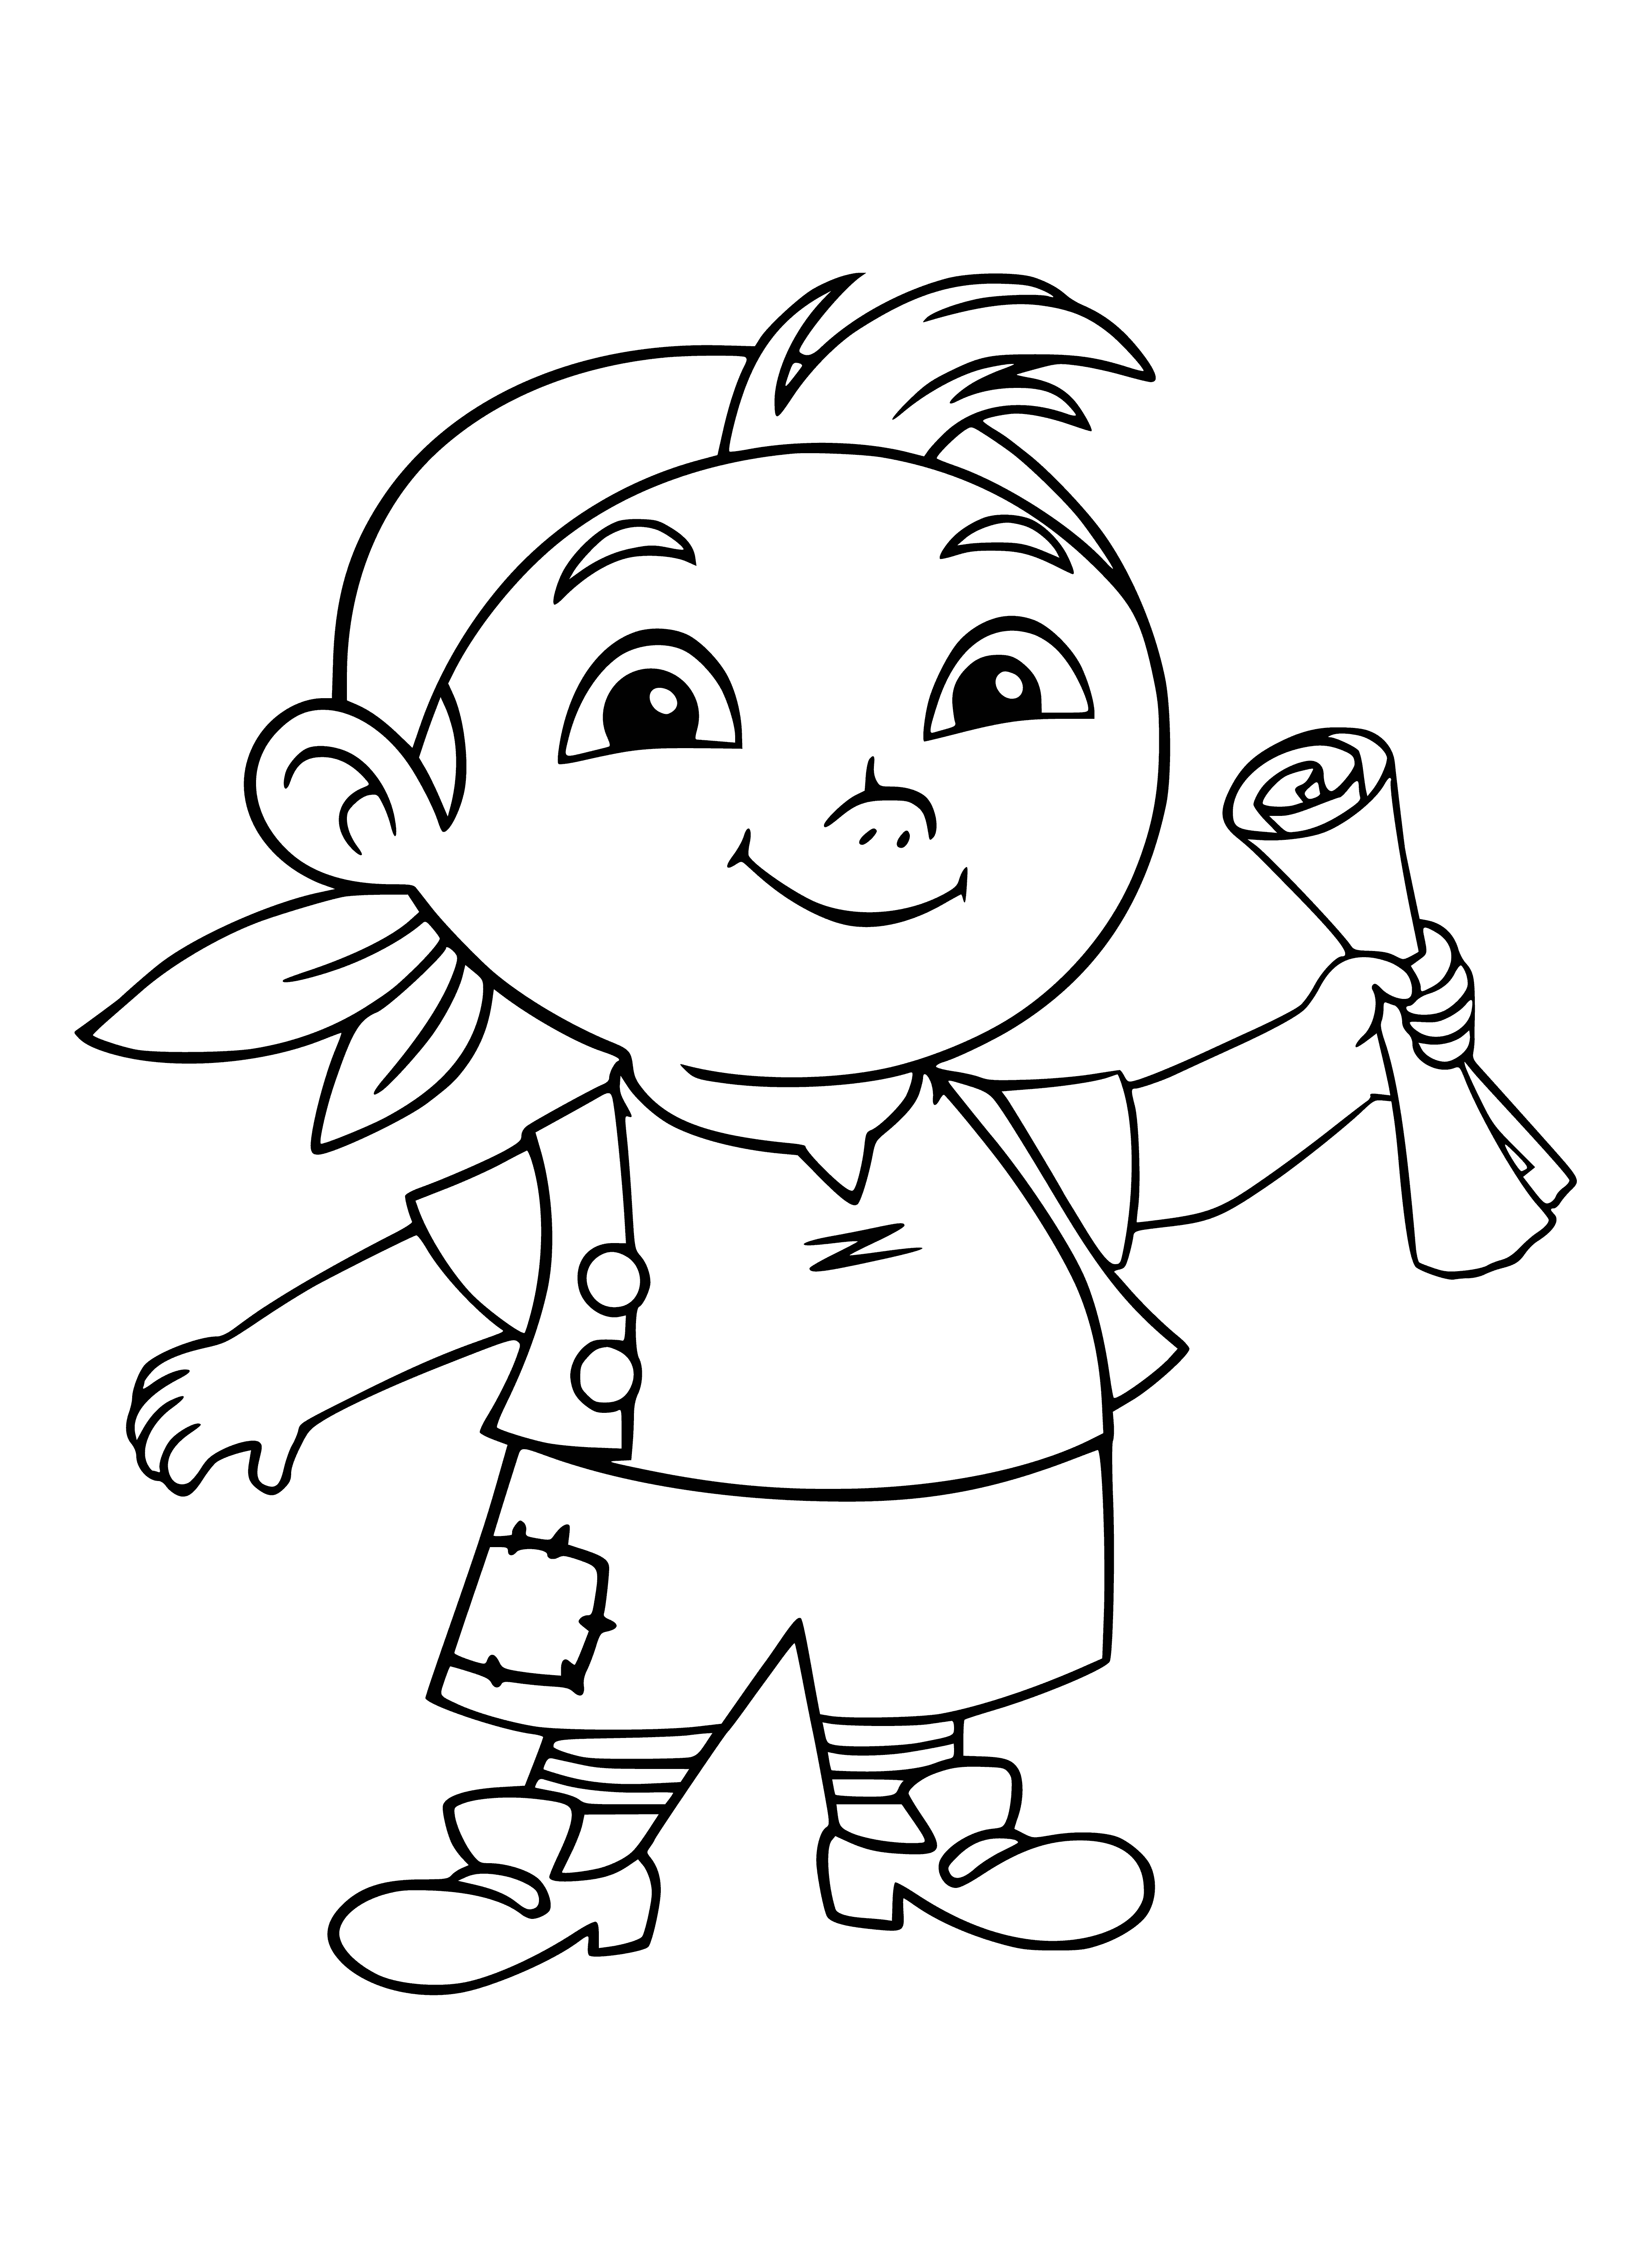 coloring page: Jake and team have an unforgettable, swashbuckling adventure with Cabby and Map's help!